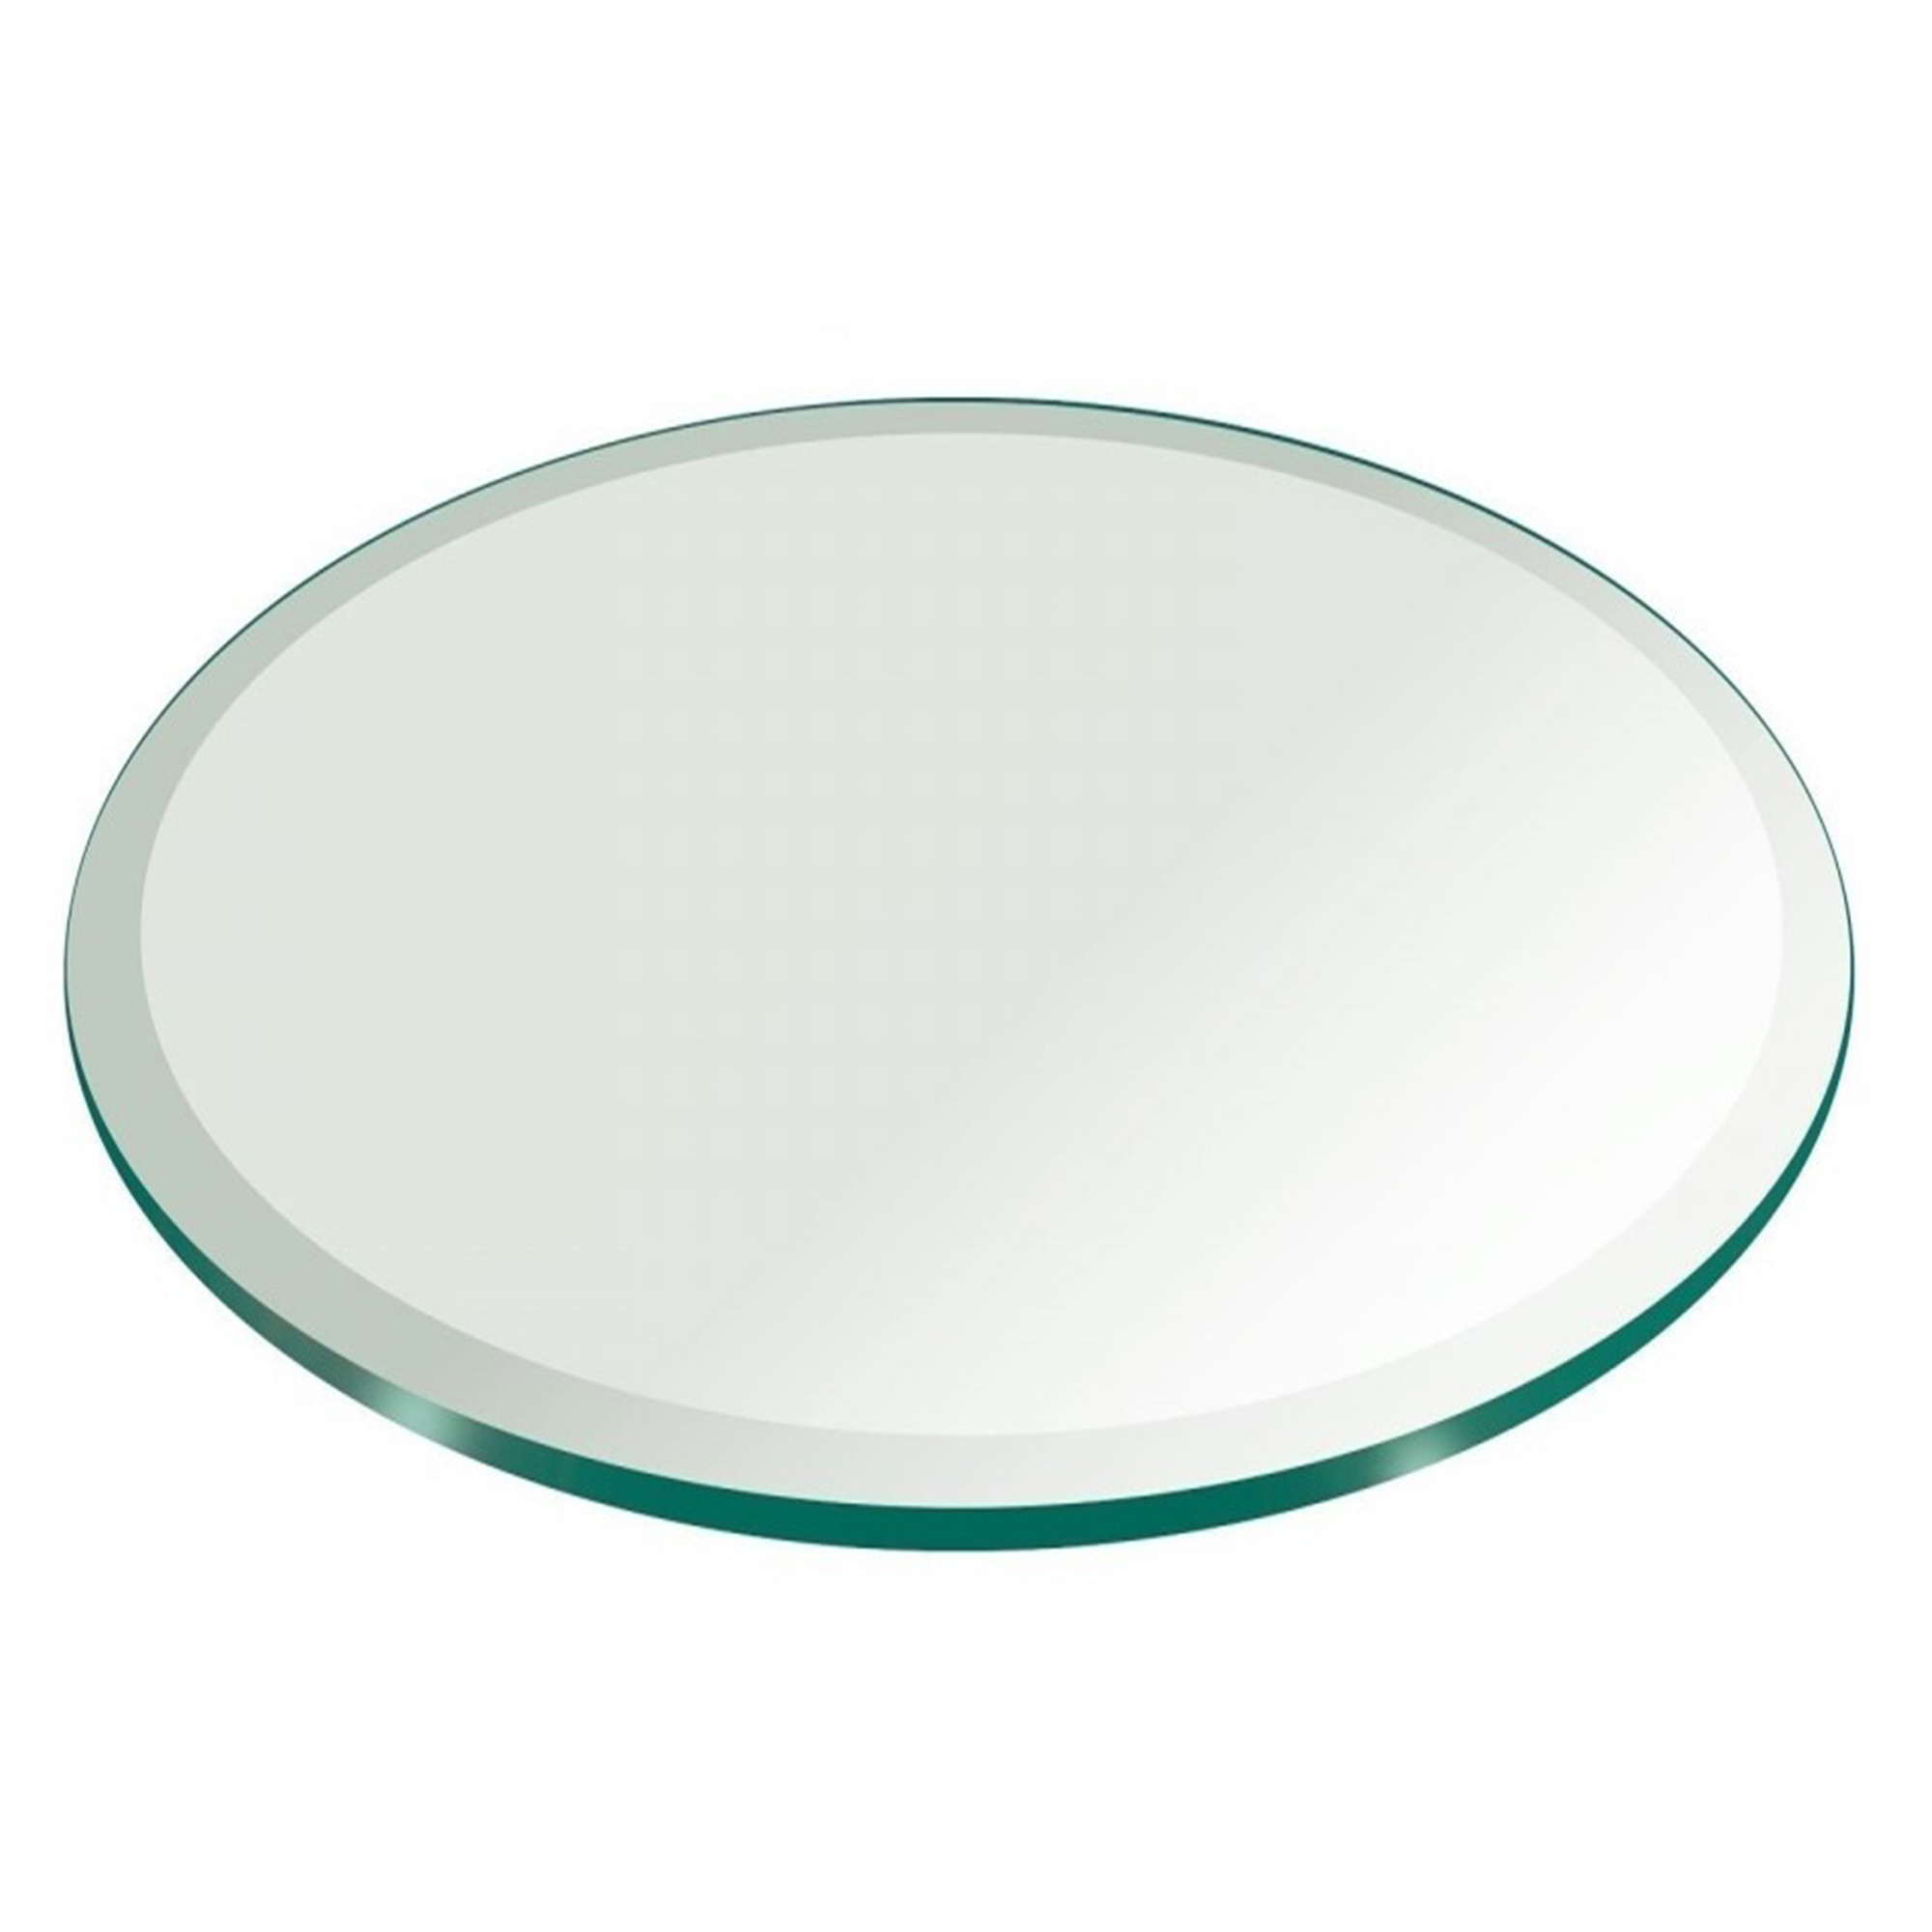 Glass Table Top 50 Inch Round 1 2, 50 Inch Round Mirror